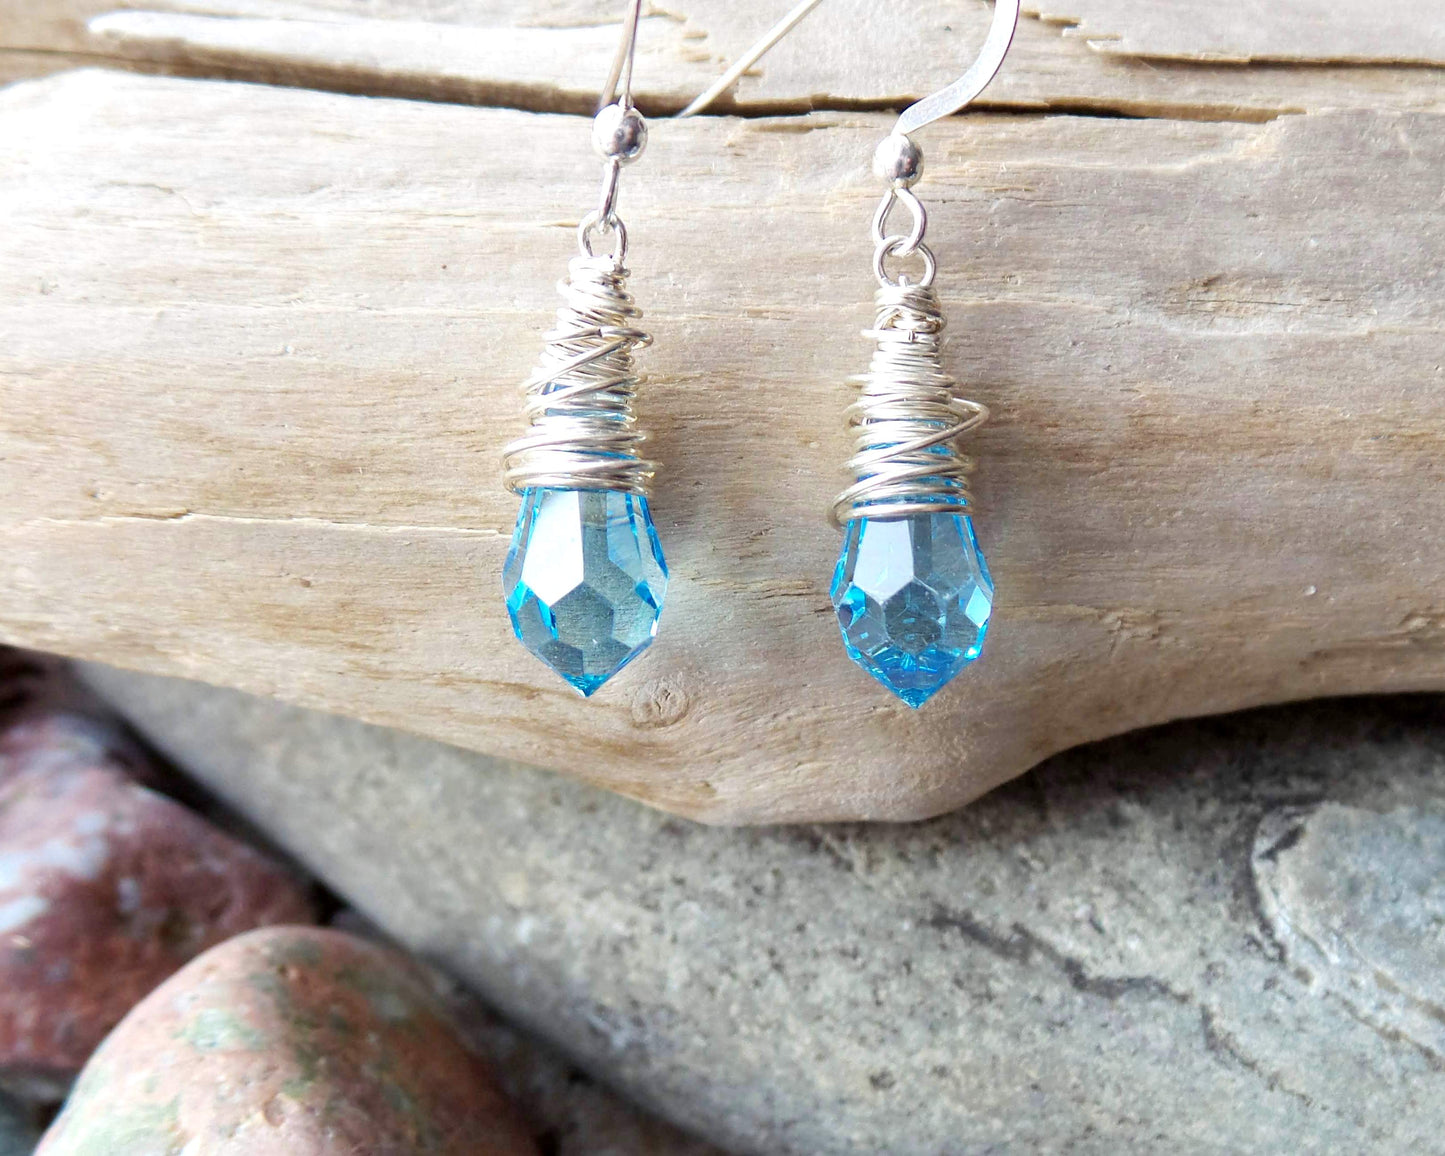 Brilliant Aqua Blue Crystal Sterling Silver Wire Wrapped Earrings on French earring hooks